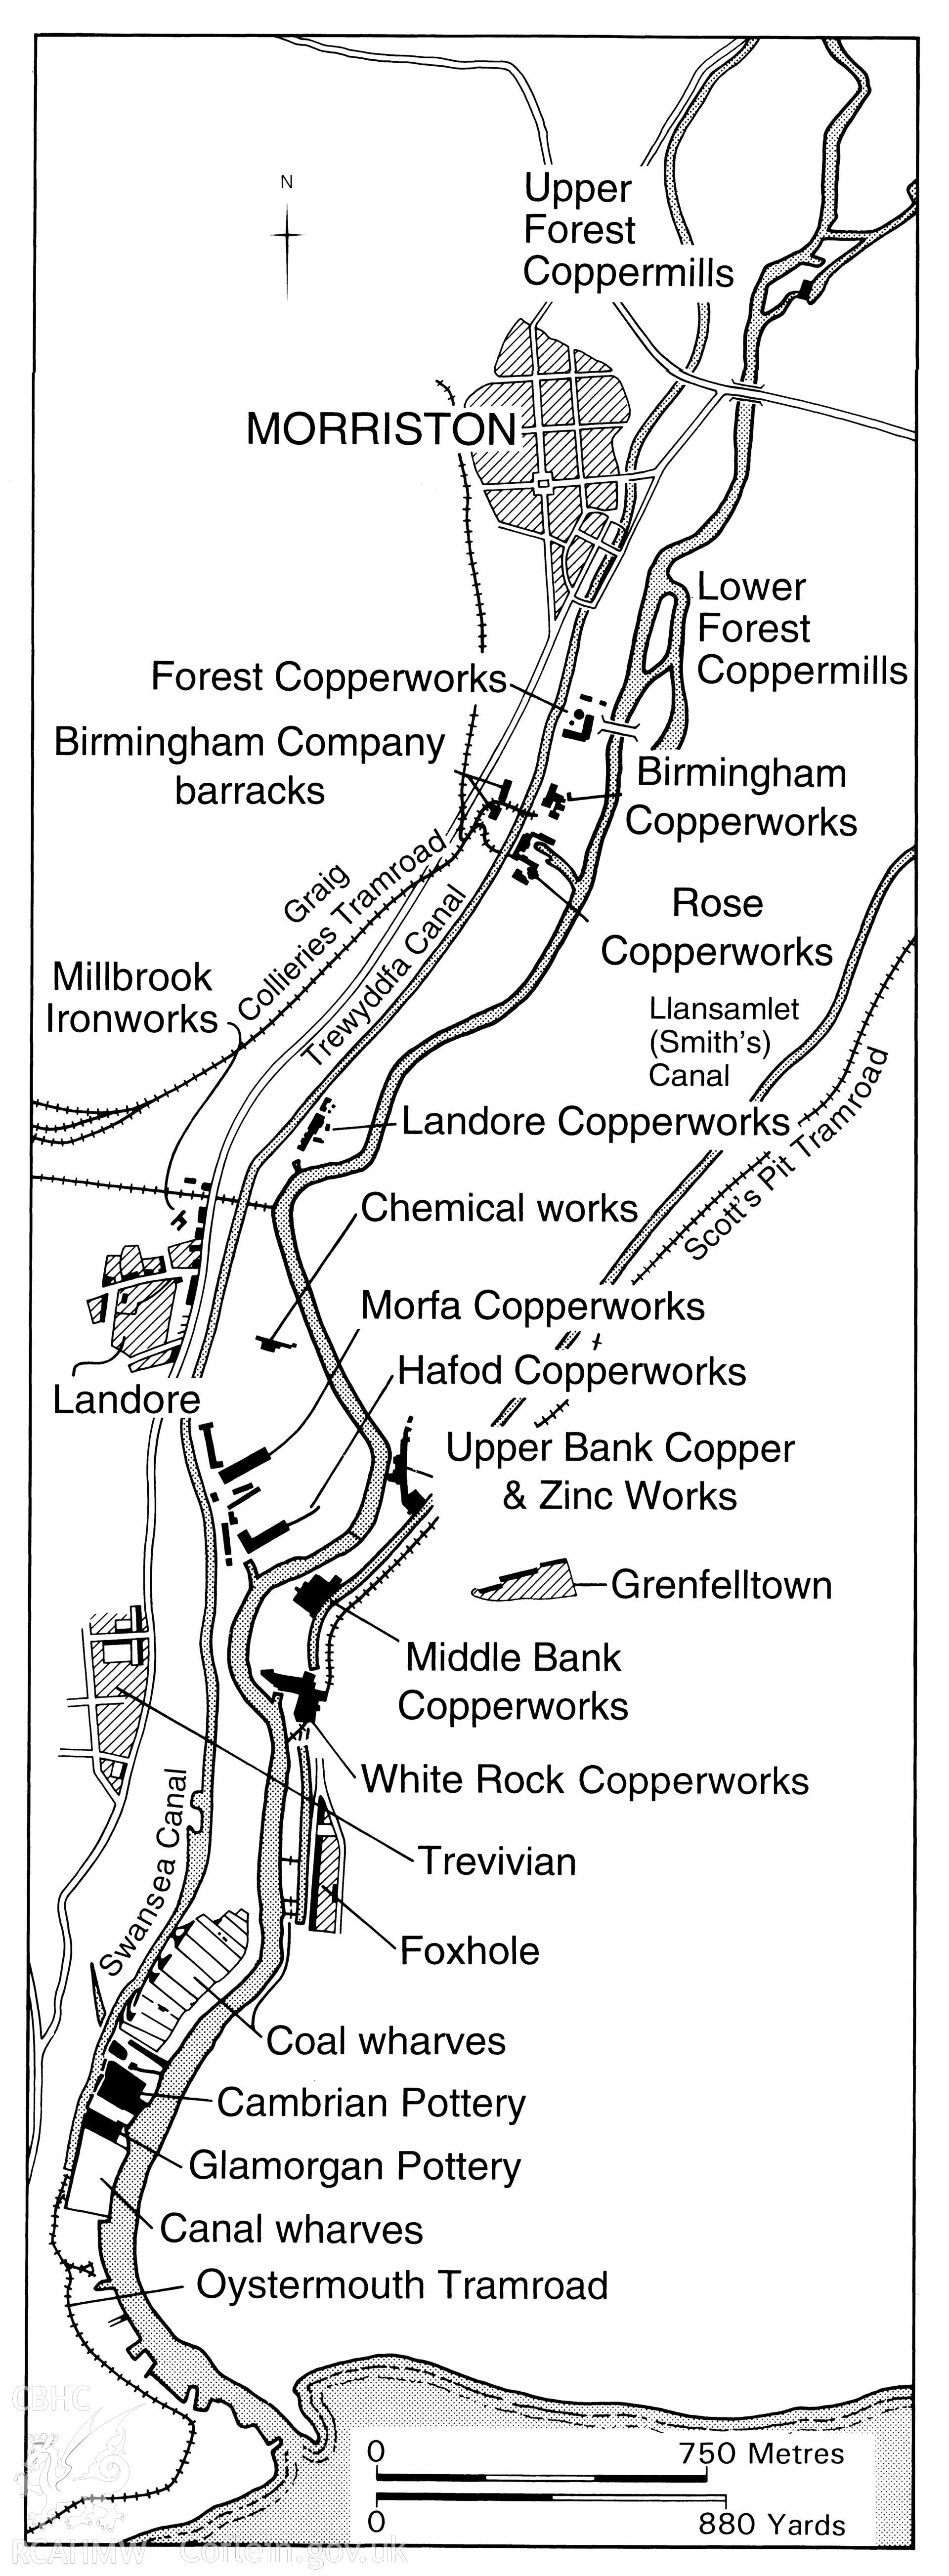 Map of the lower Swansea Valley area showing copper-smelting works in use in 1830-1840, as used in the RCAHMW publication "Copperopolis", p.15, fig. 28.